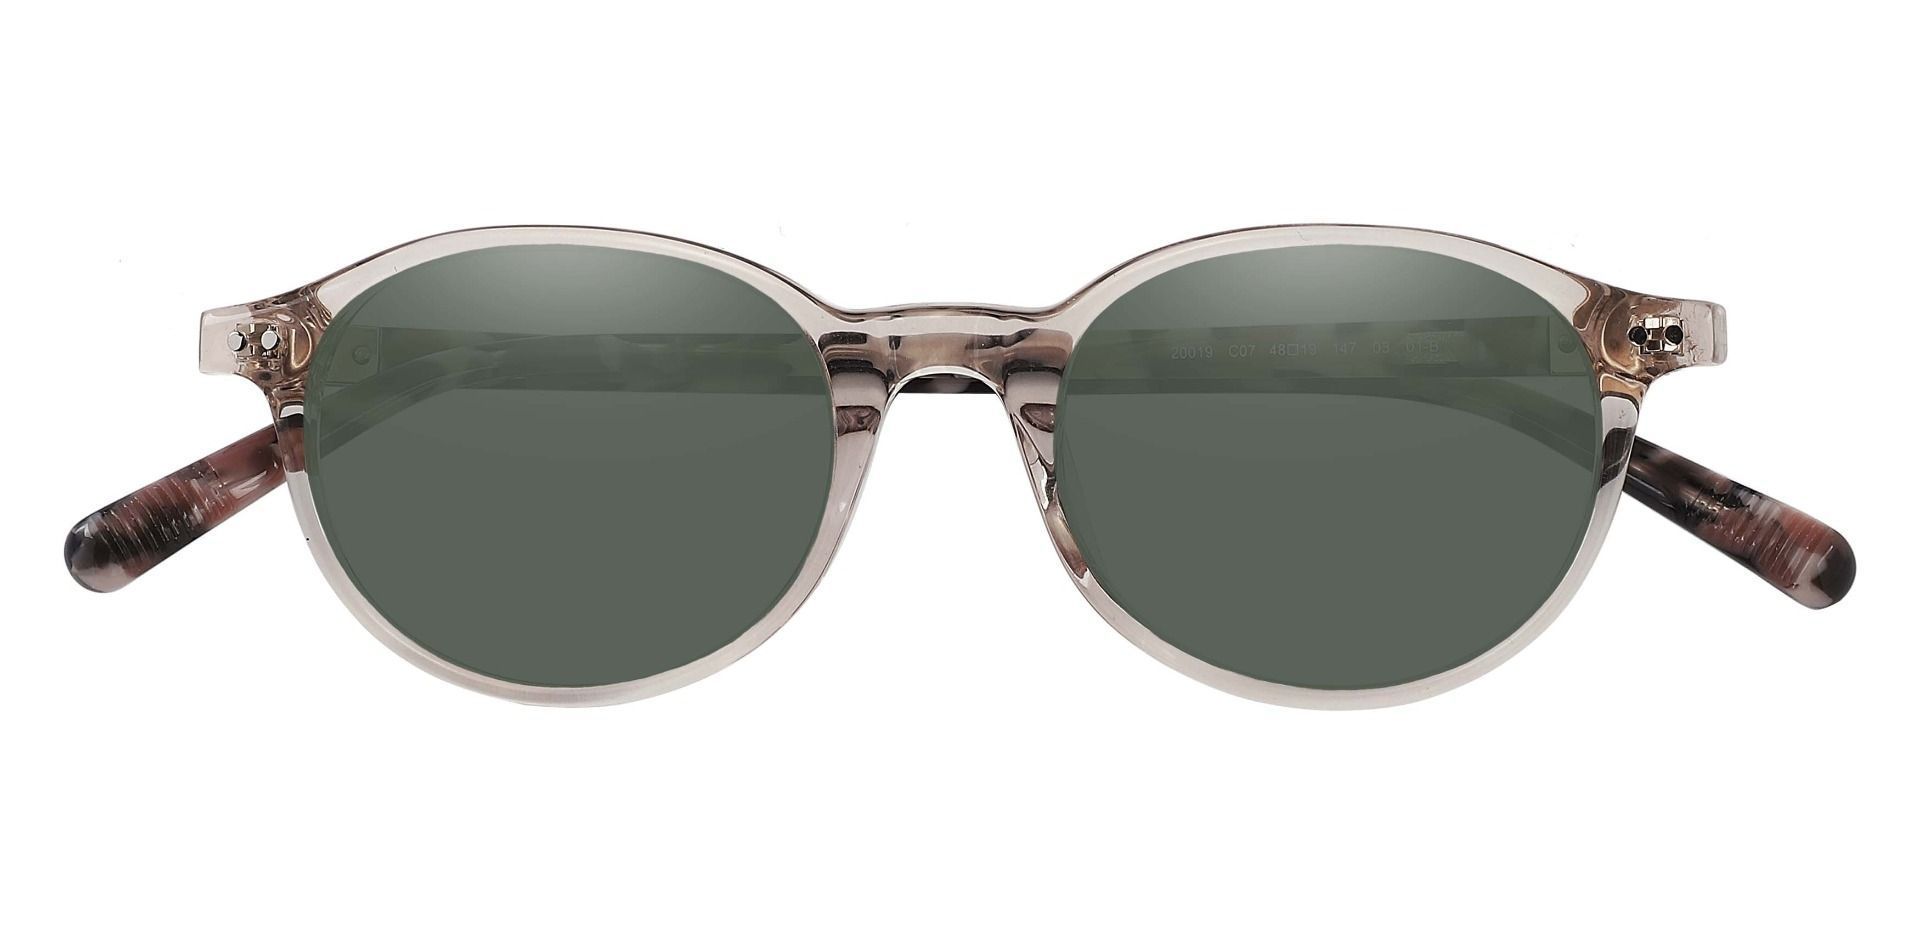 Avon Oval Lined Bifocal Sunglasses - Clear Frame With Green Lenses